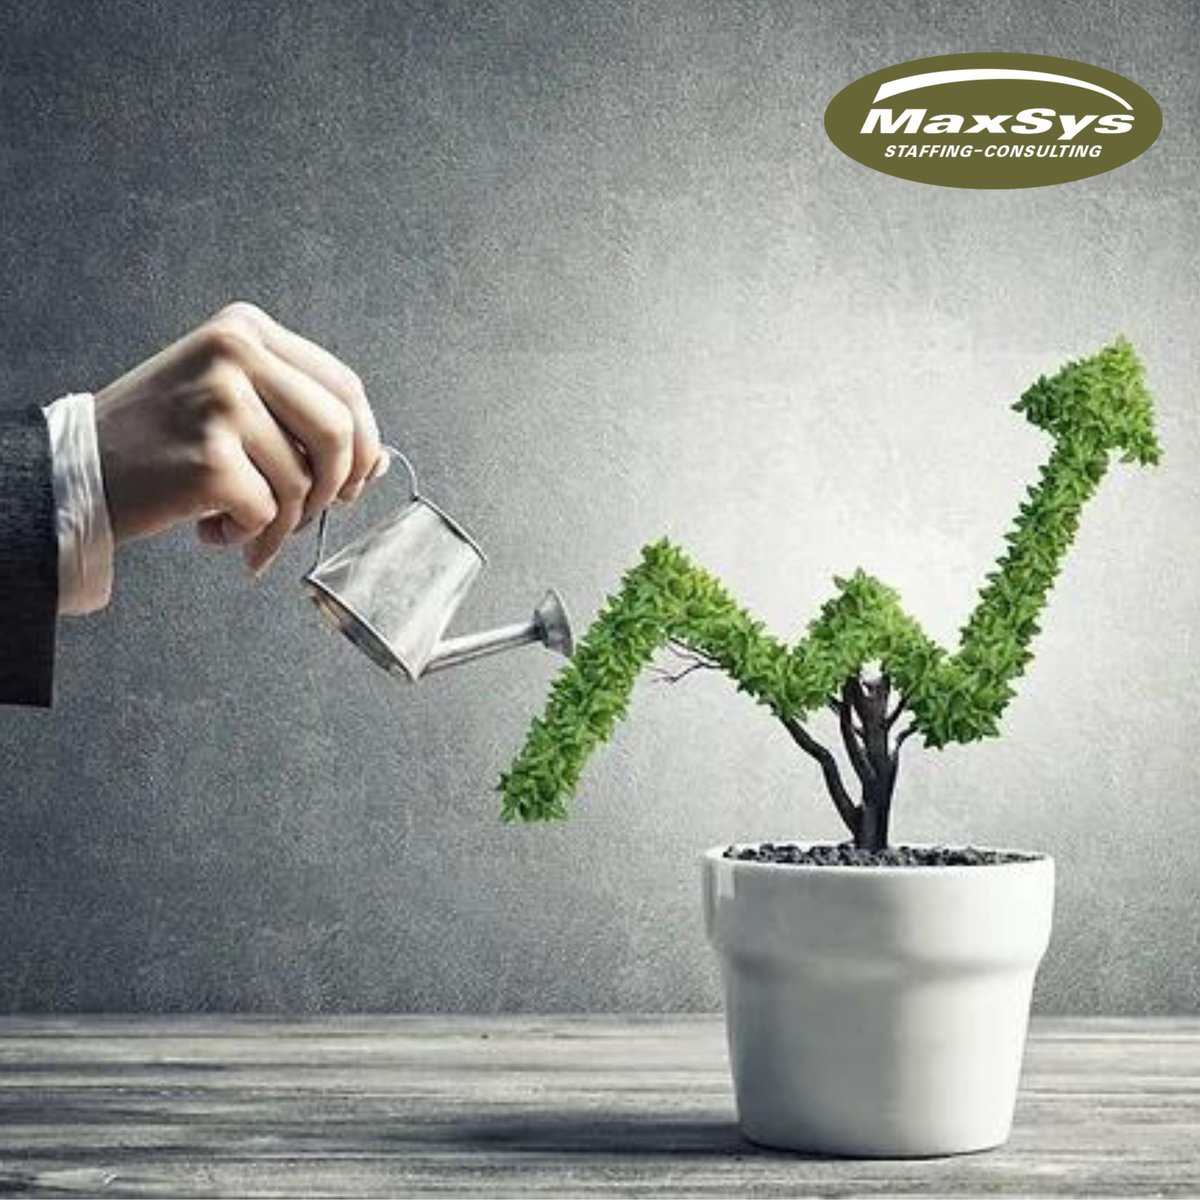 #blog Growing your business: Sometimes, it’s about scaling up and expanding. But in every case, growth is about increasing the value in the business.

Make sure to read the full blog post for more details: maxsys.ca/organic-growth…

#blog #blog2023 #organicgrowth #buisnessgrowth